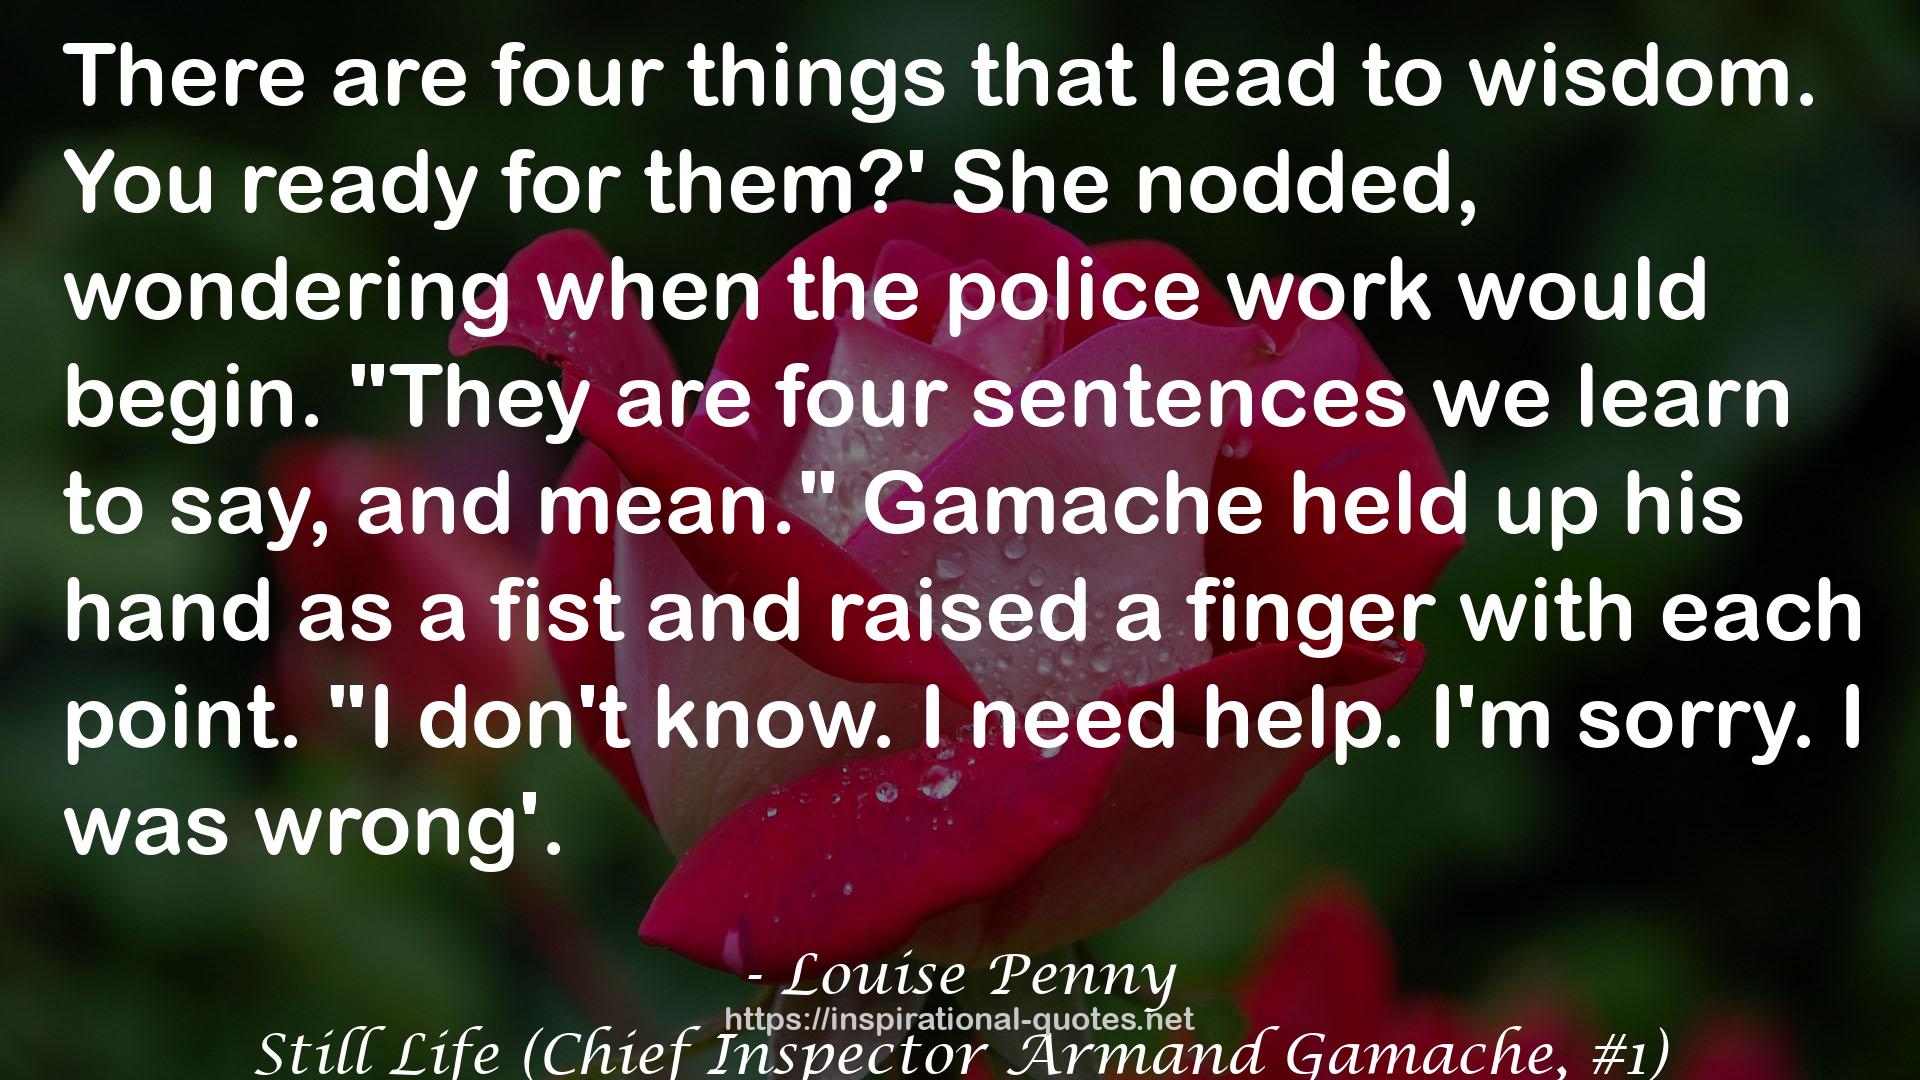 Louise Penny QUOTES